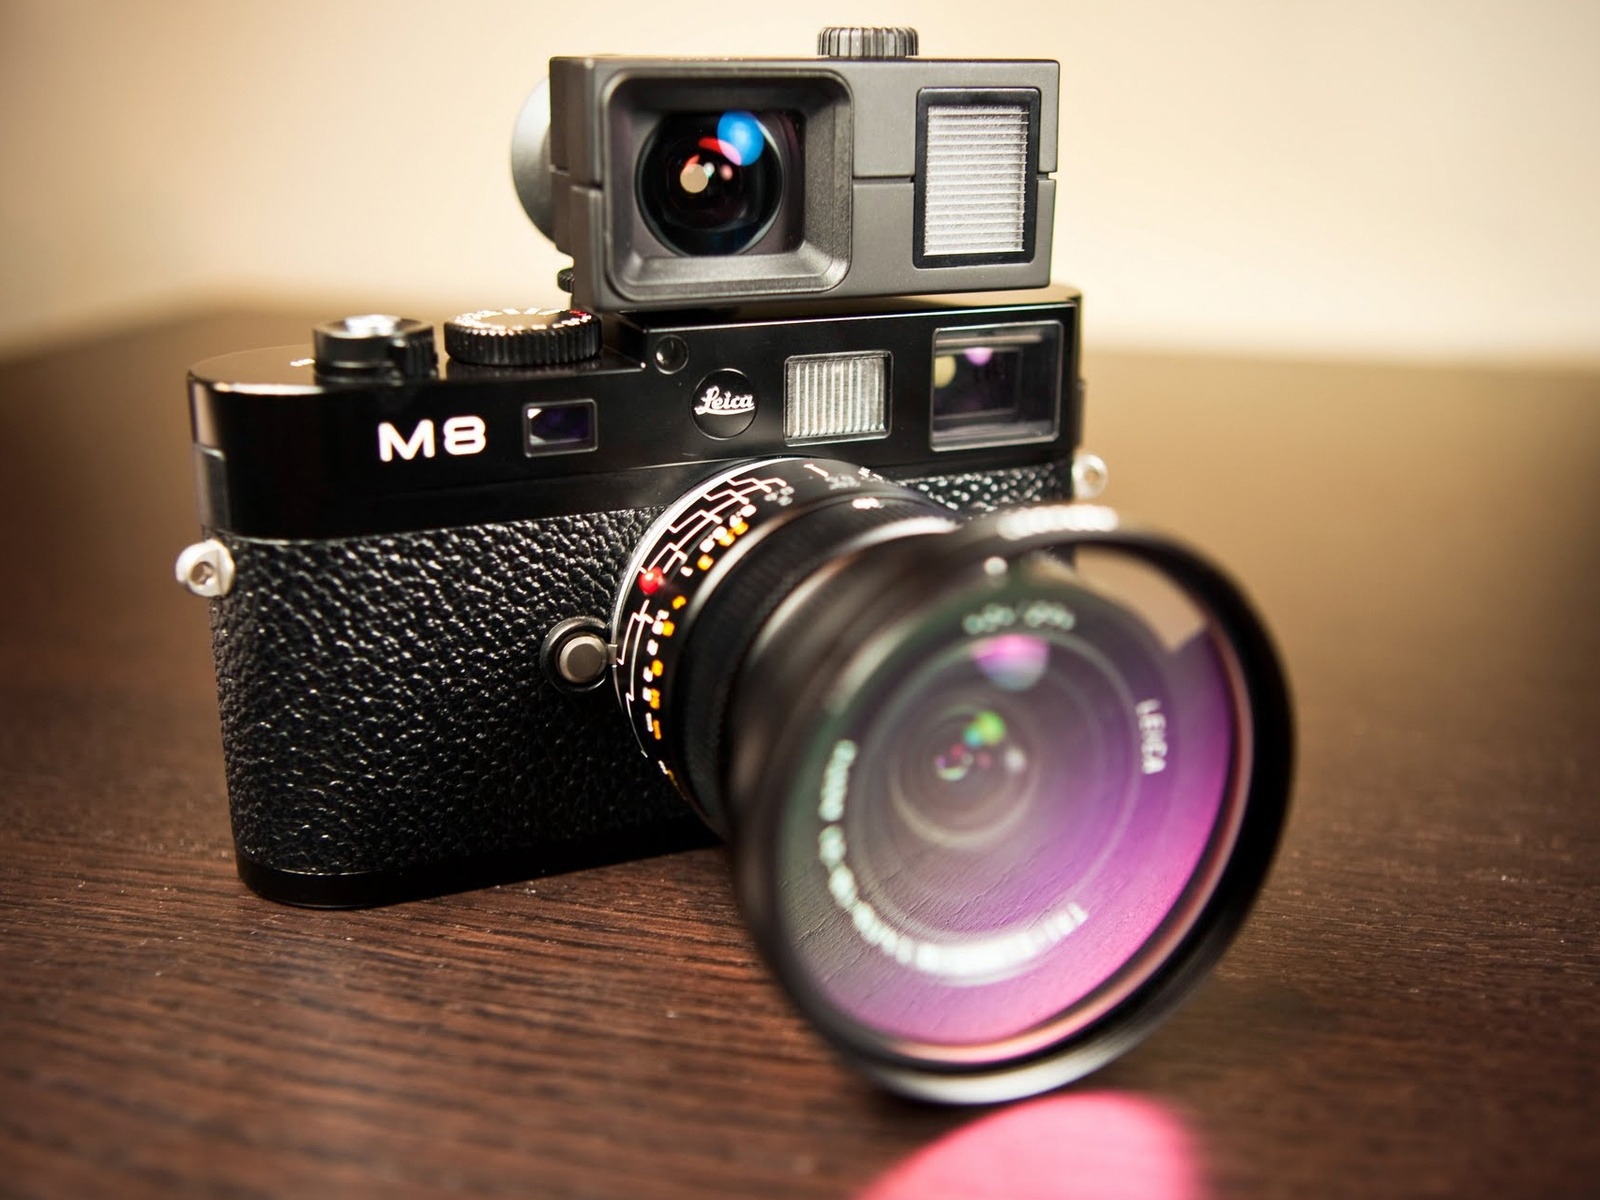 Leica M8 for 1600 x 1200 resolution